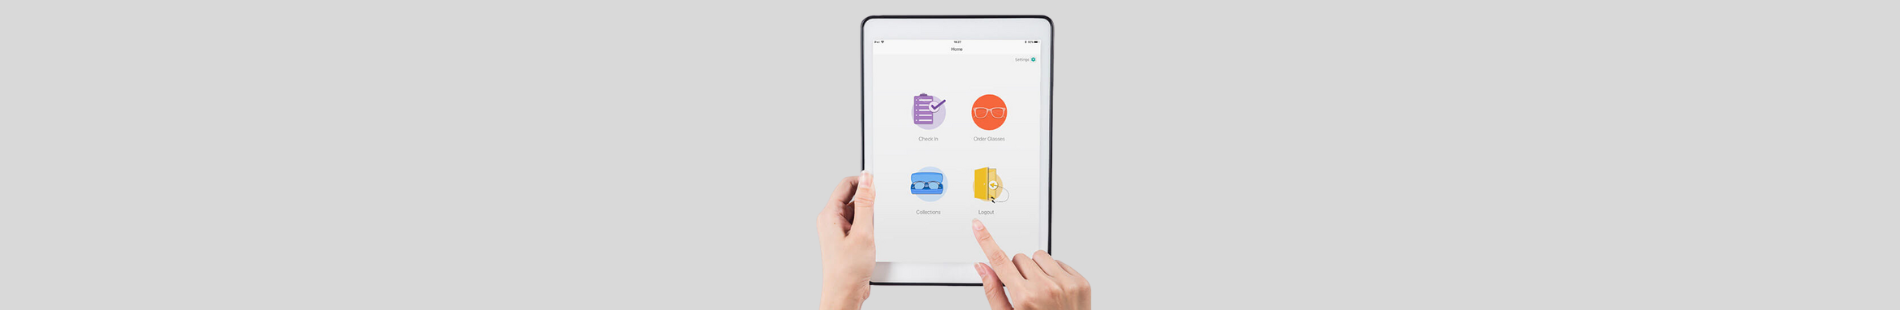 Ocuco Launches iPad Application for Acuitas and Focus PMS